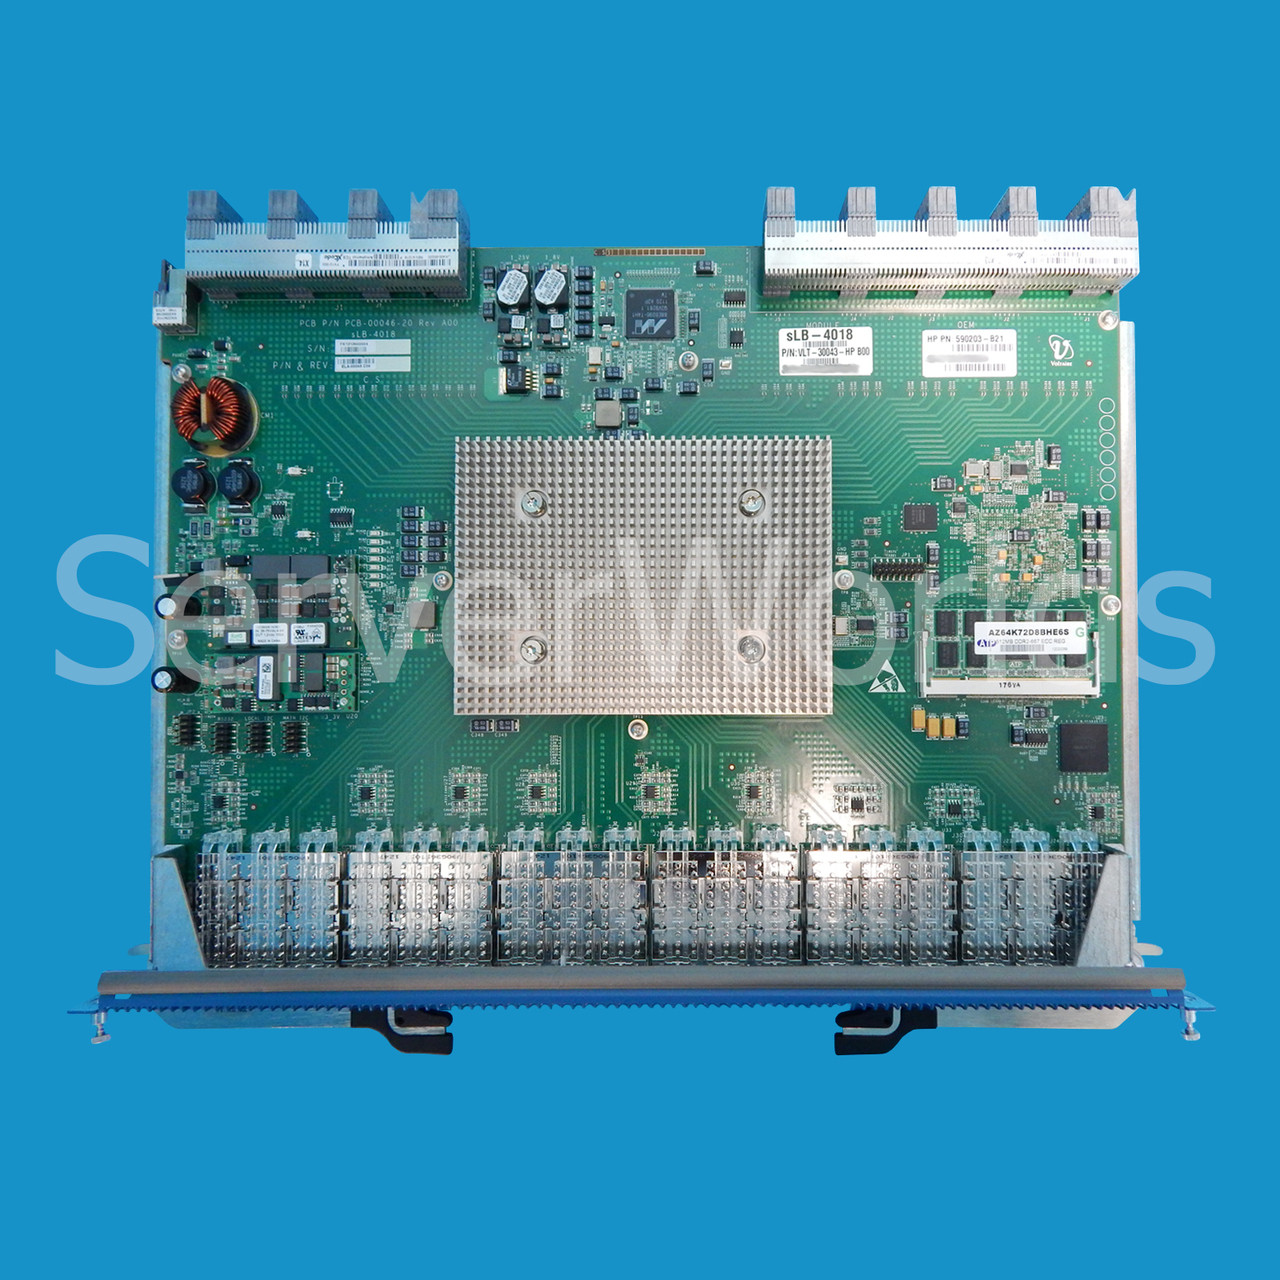 HP 590203-B21 Voltaire 18-Port 324p SLB-4018 Network Switch 592279-001